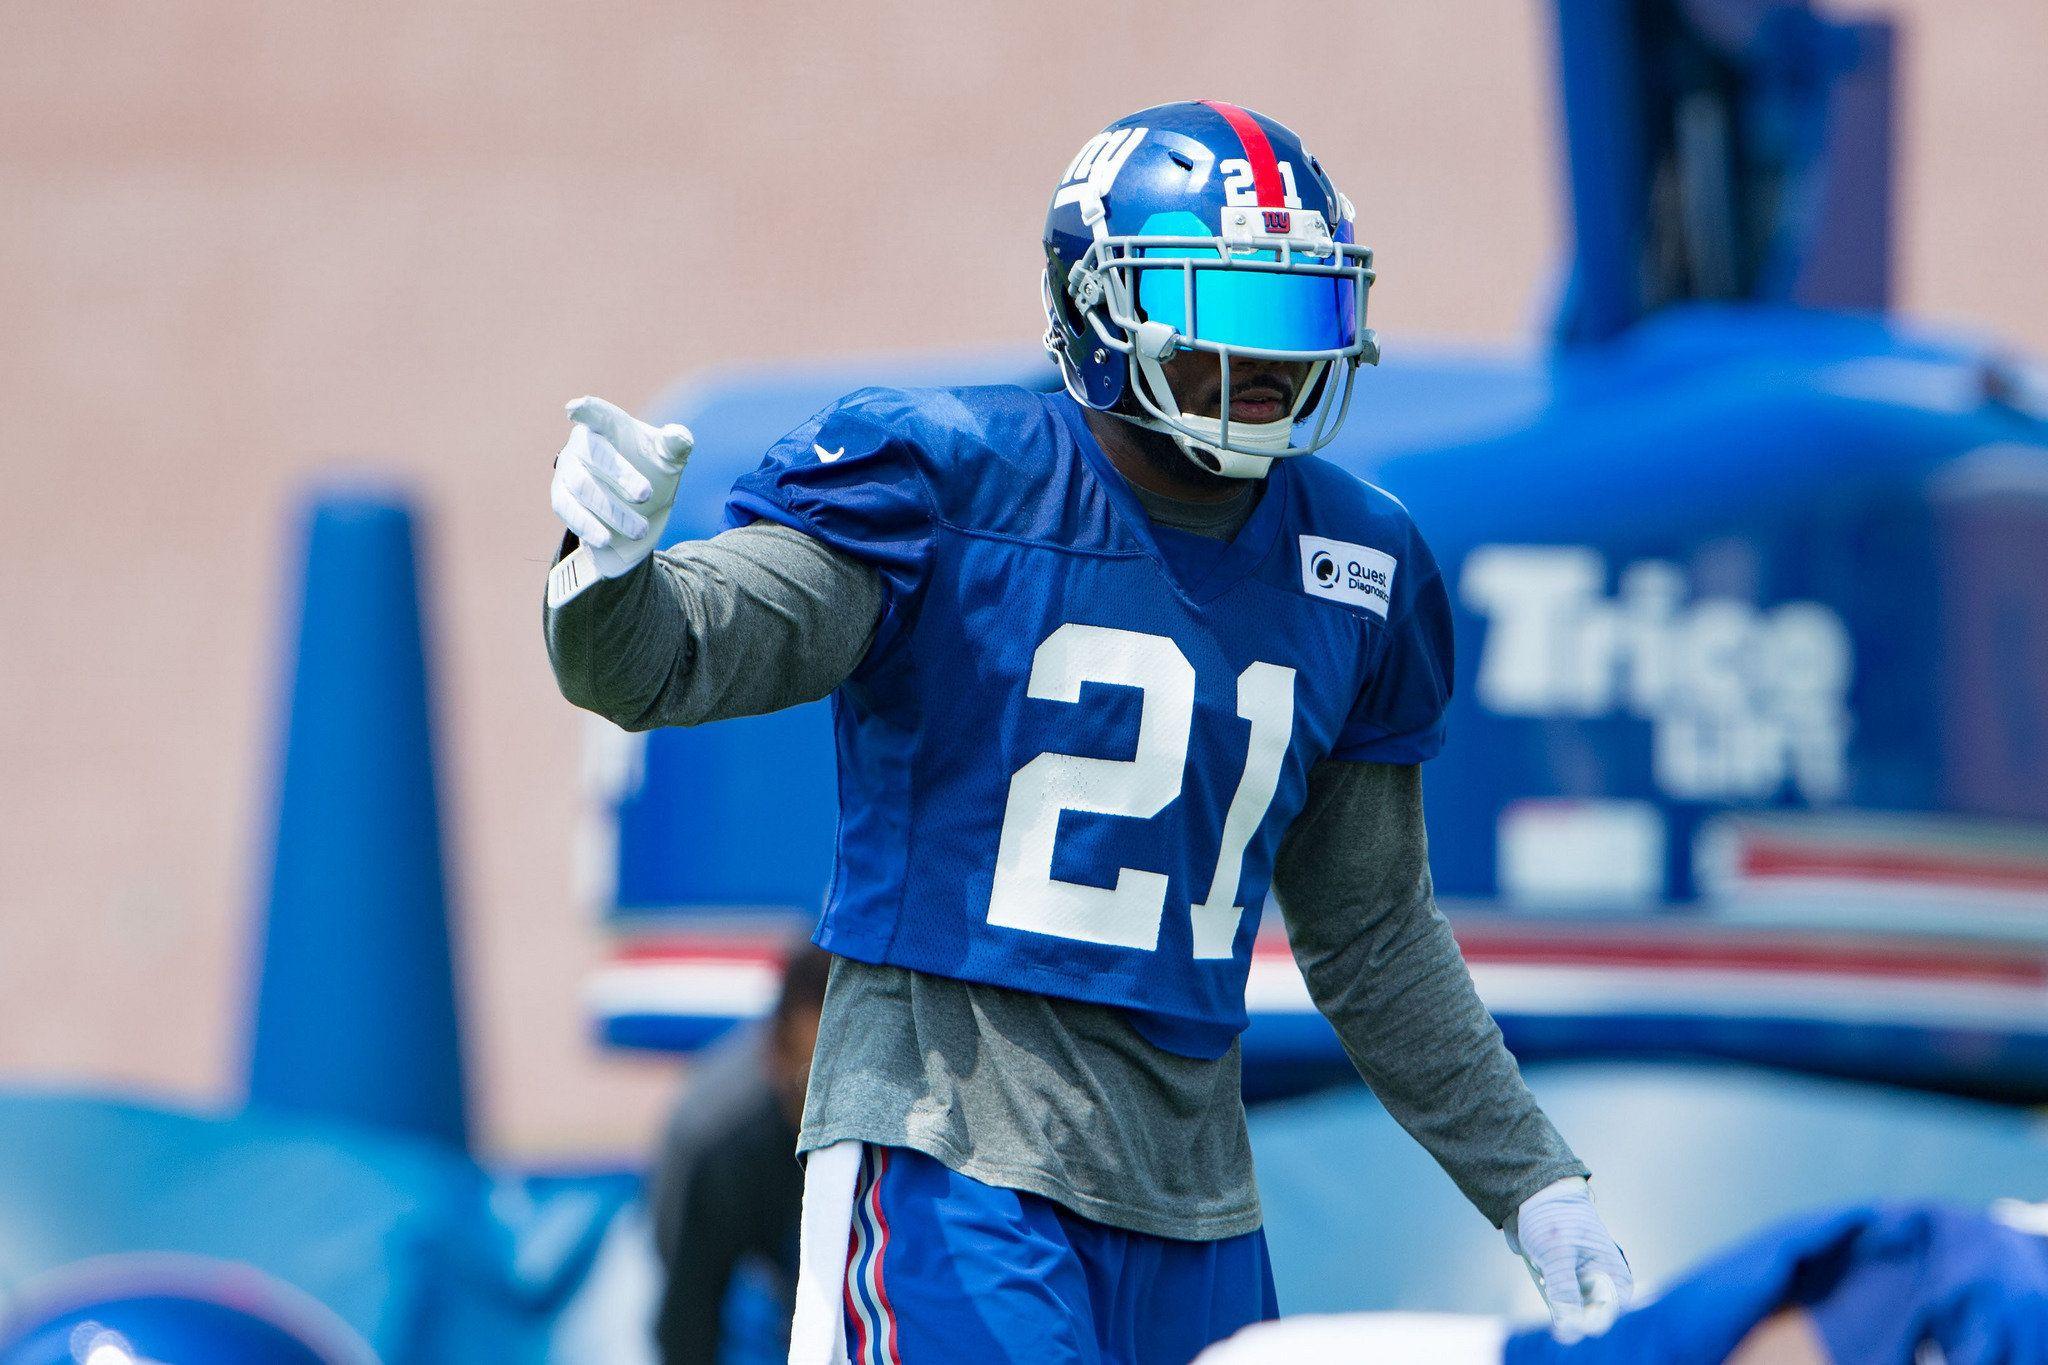 Giants safety Landon Collins' breakout season garners another honor